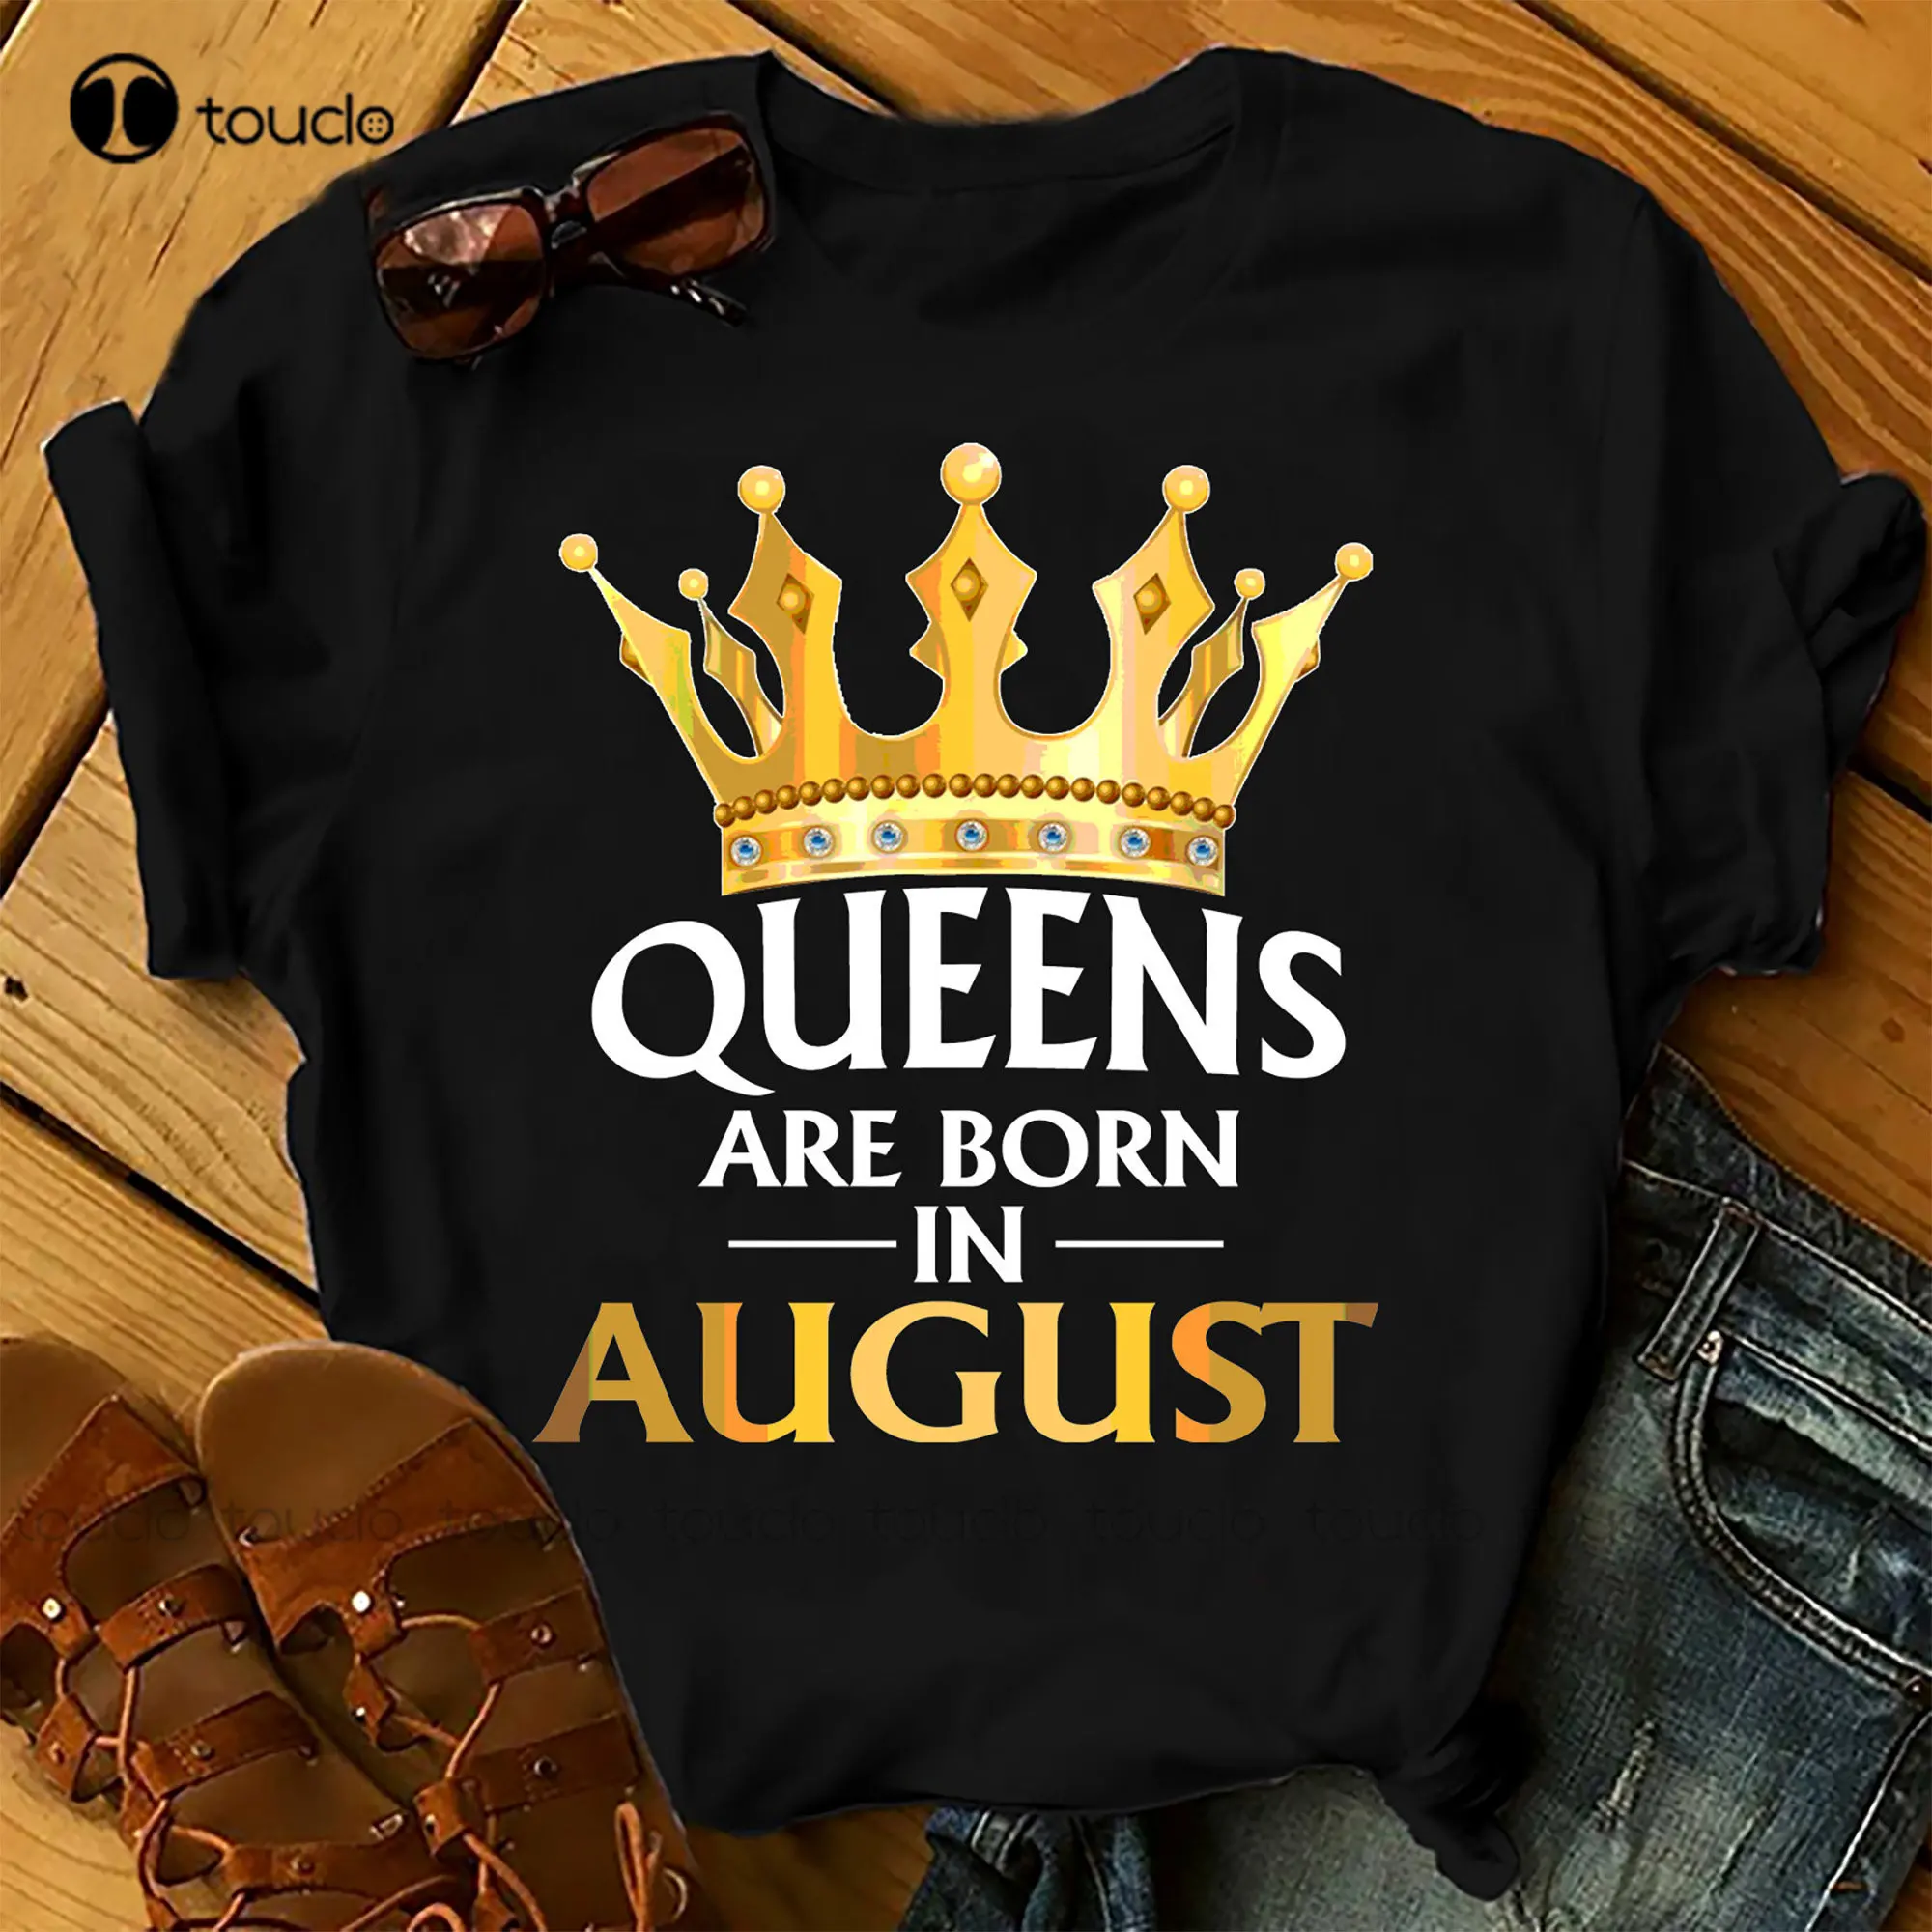 

Queens Are Born In August Shirts Women Birthday T Shirts Summer Tops Beach T Shirts Tee Shirts Womens Xs-5Xl Breathable Cotton